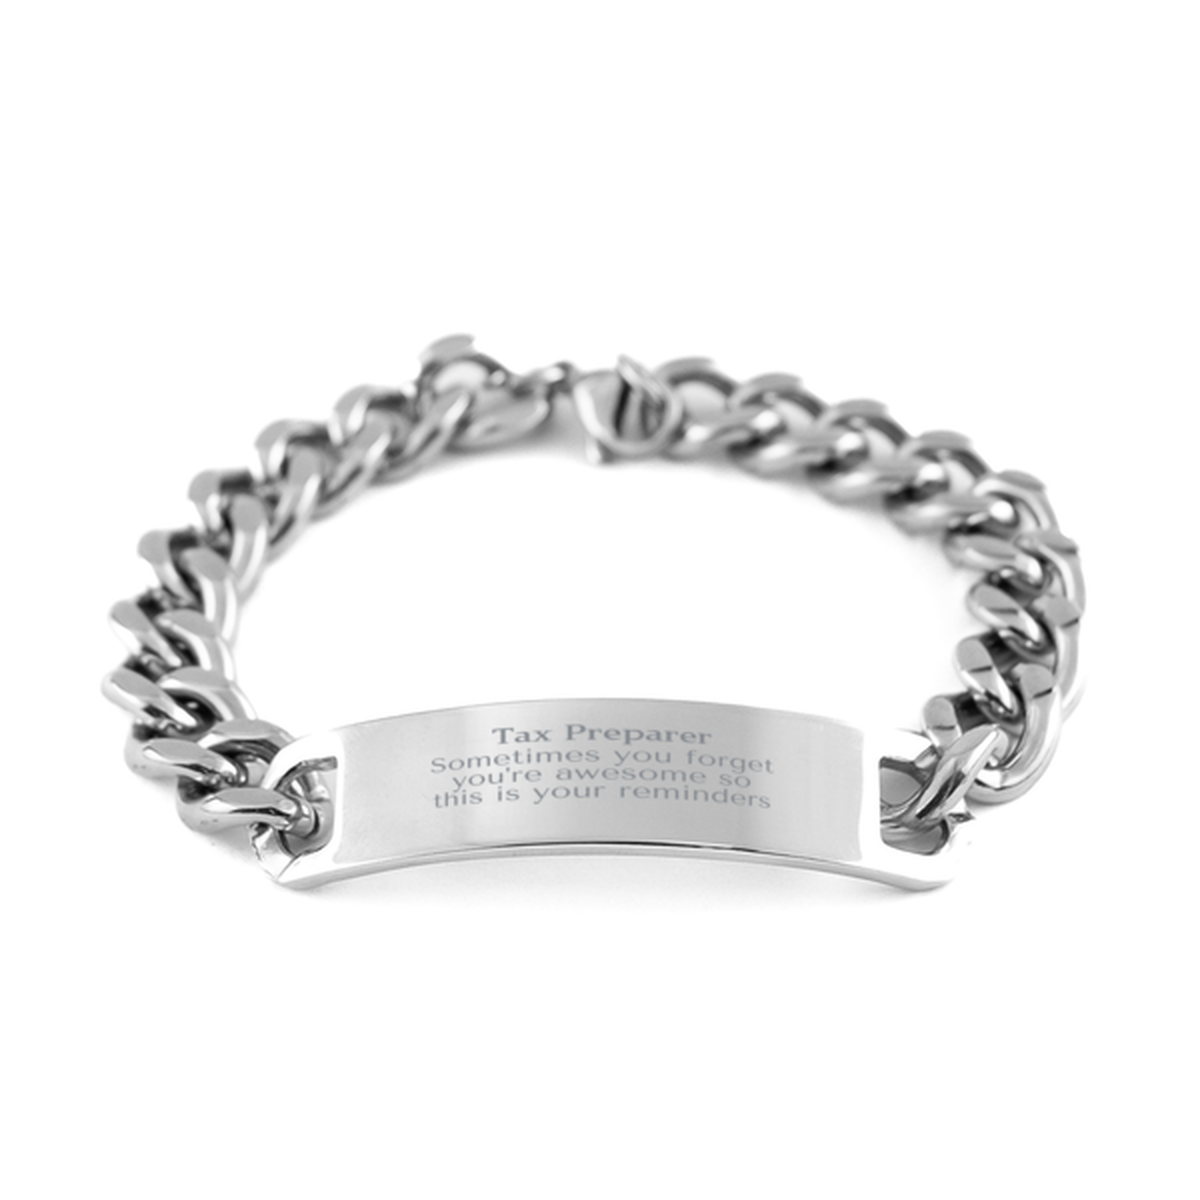 Sentimental Tax Preparer Cuban Chain Stainless Steel Bracelet, Tax Preparer Sometimes you forget you're awesome so this is your reminders, Graduation Christmas Birthday Gifts for Tax Preparer, Men, Women, Coworkers